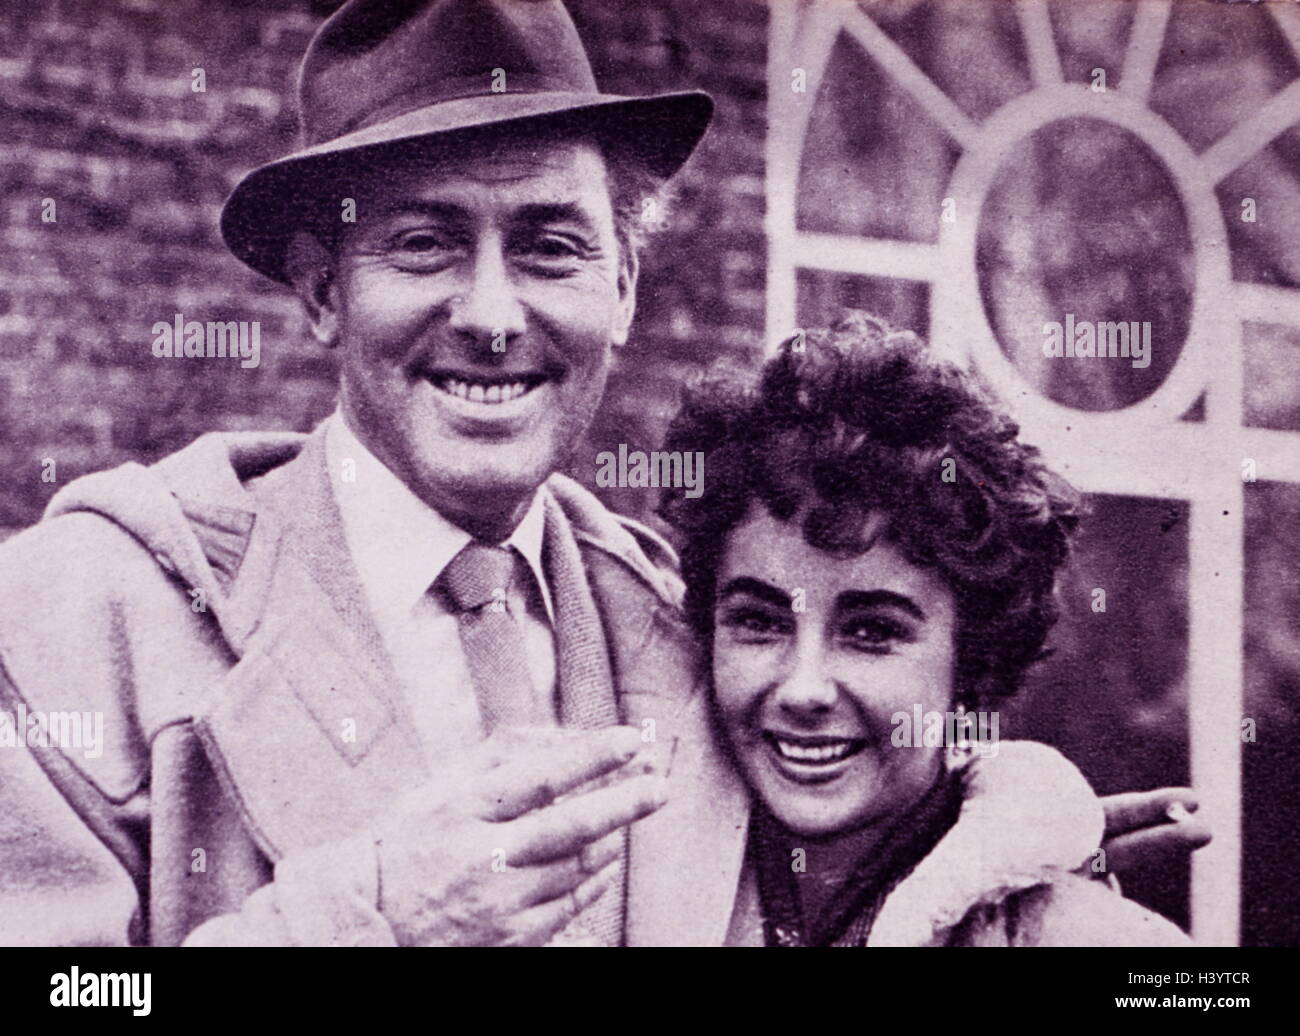 Photograph of Michael Wilding (1912-1979) and his wife Elizabeth Taylor (1932-2011). Dated 20th Century Stock Photo